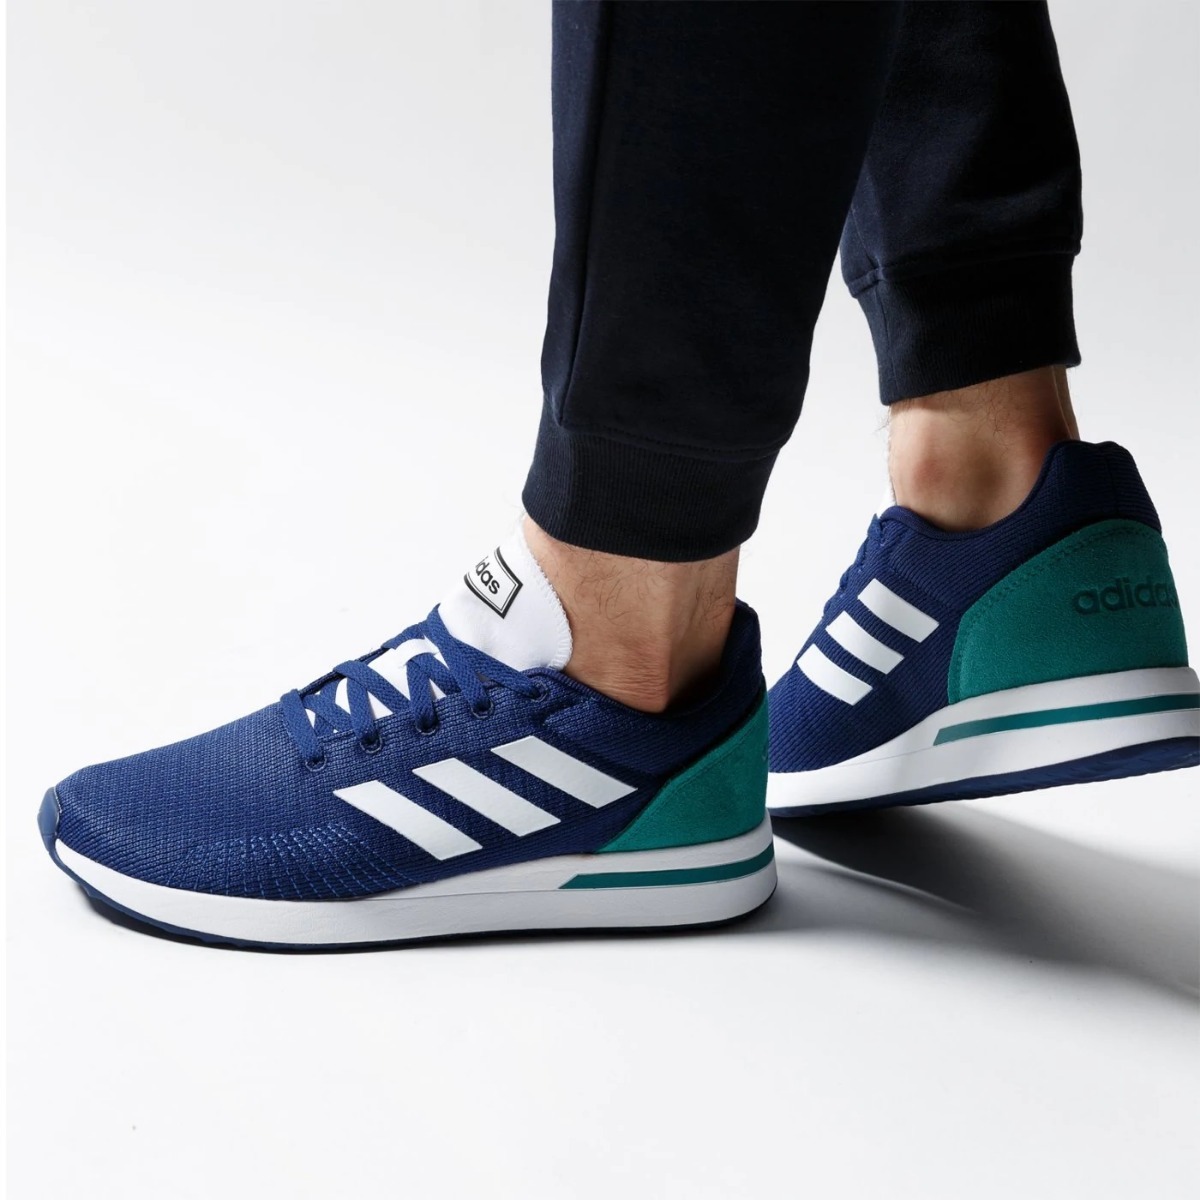 adidas run 70s mens trainers review